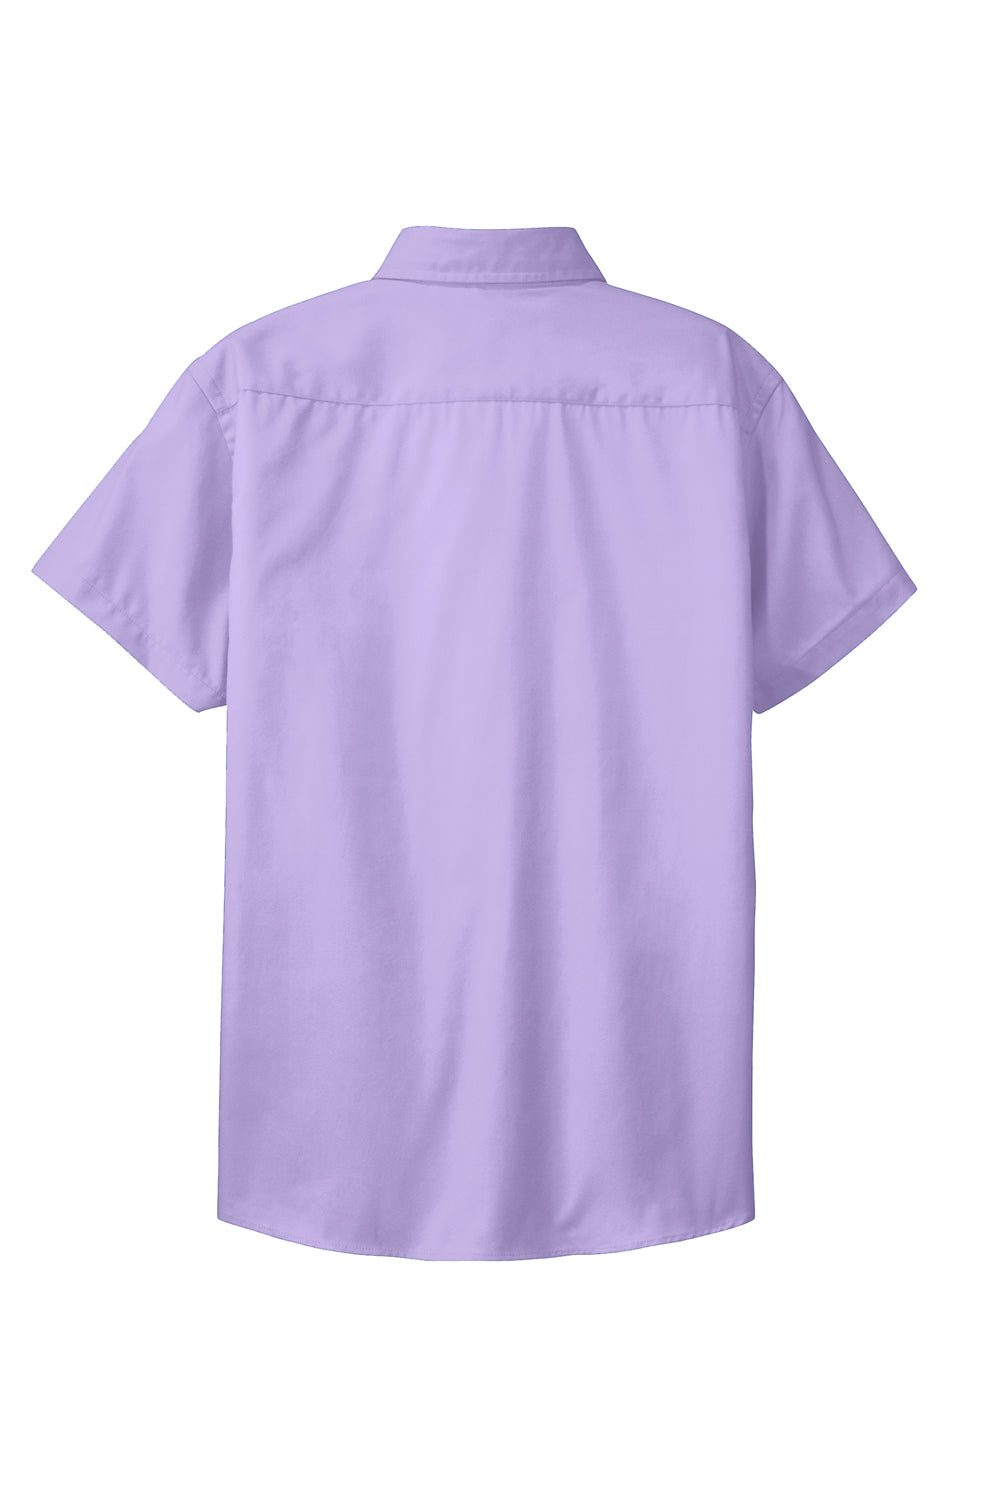 Port Authority L508 Womens Easy Care Wrinkle Resistant Short Sleeve Button Down Shirt Bright Lavender Purple Flat Back